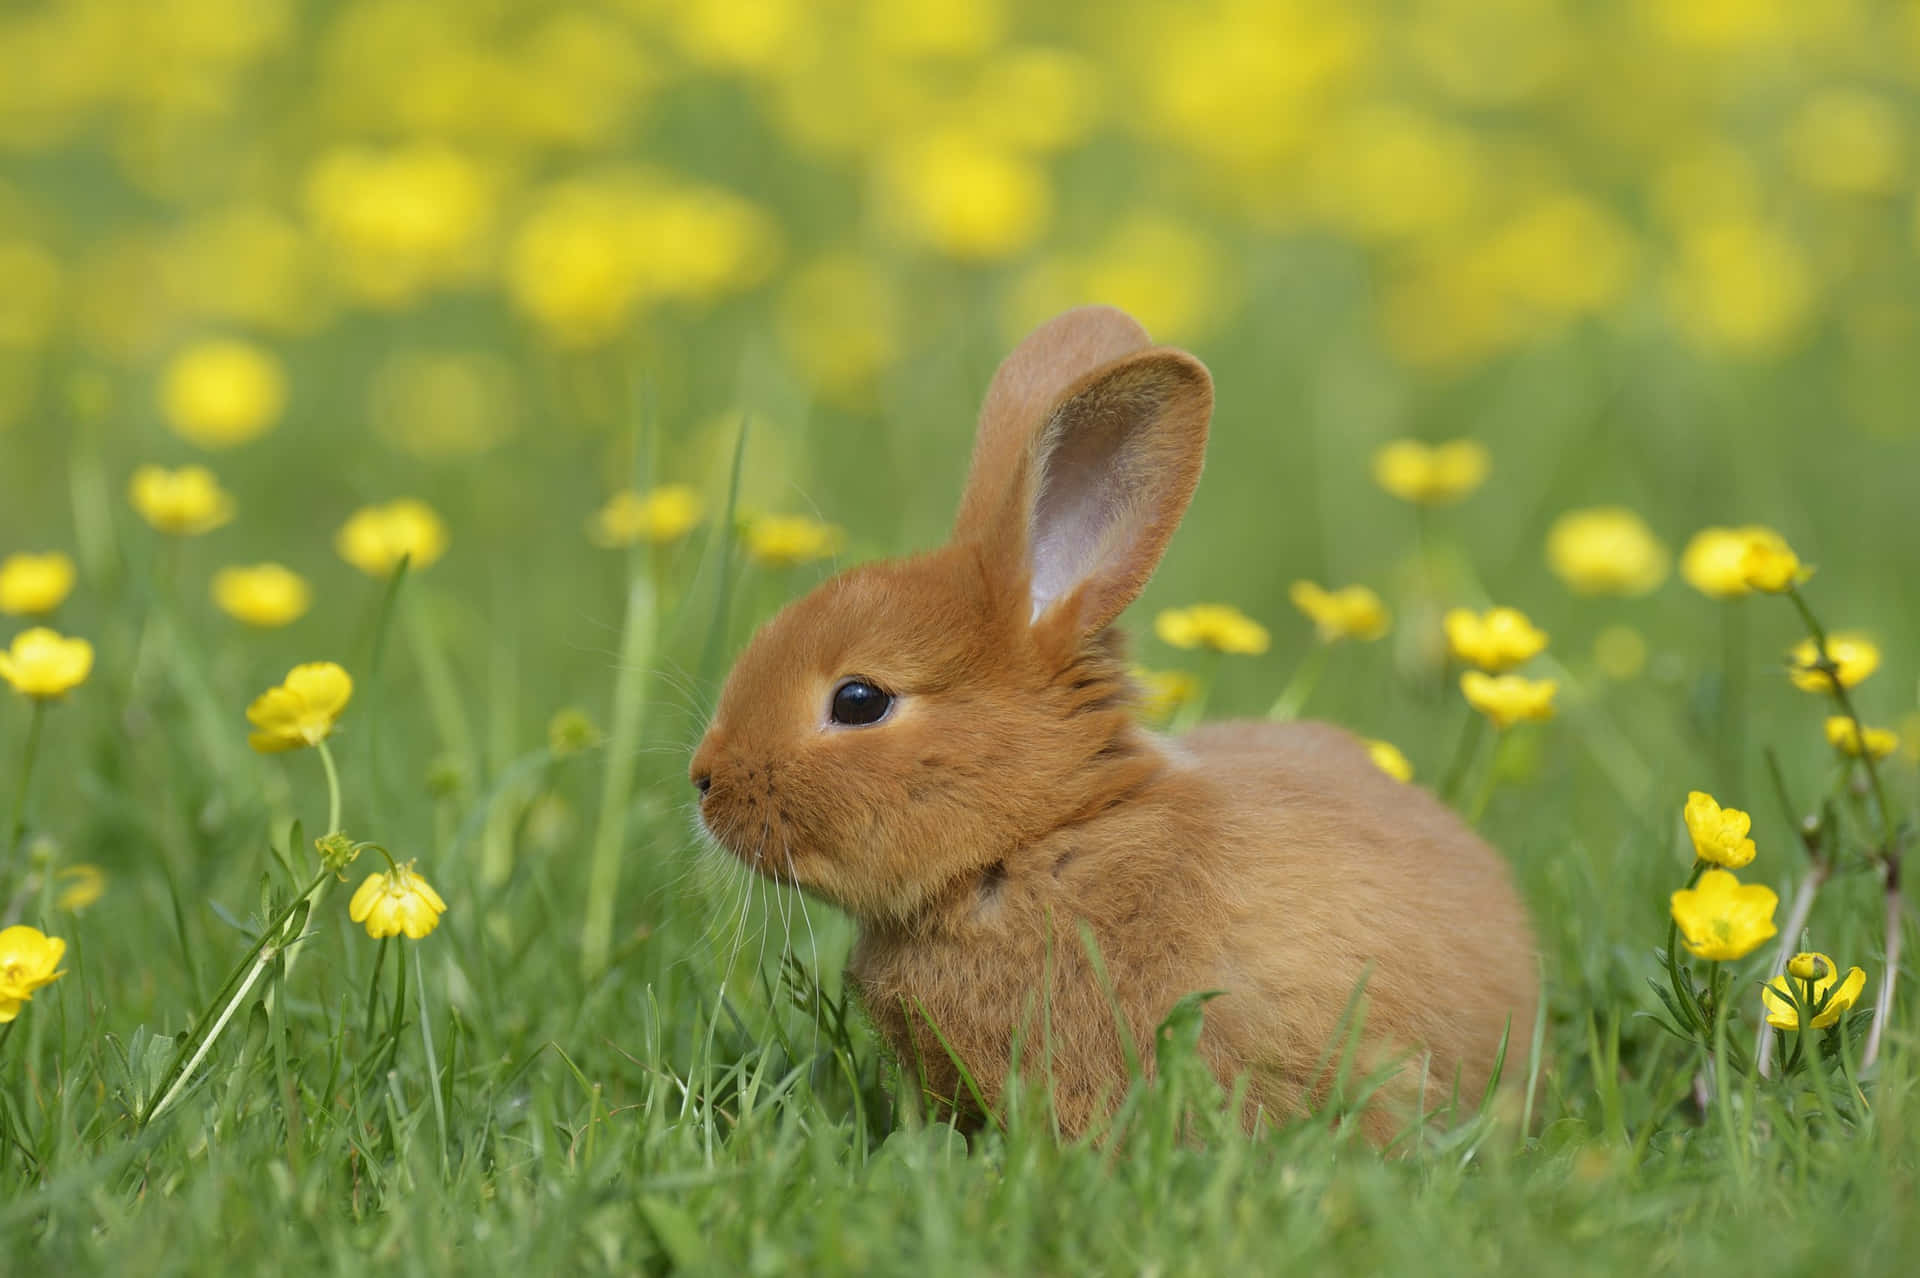 Cute Small Rabbit Pictures